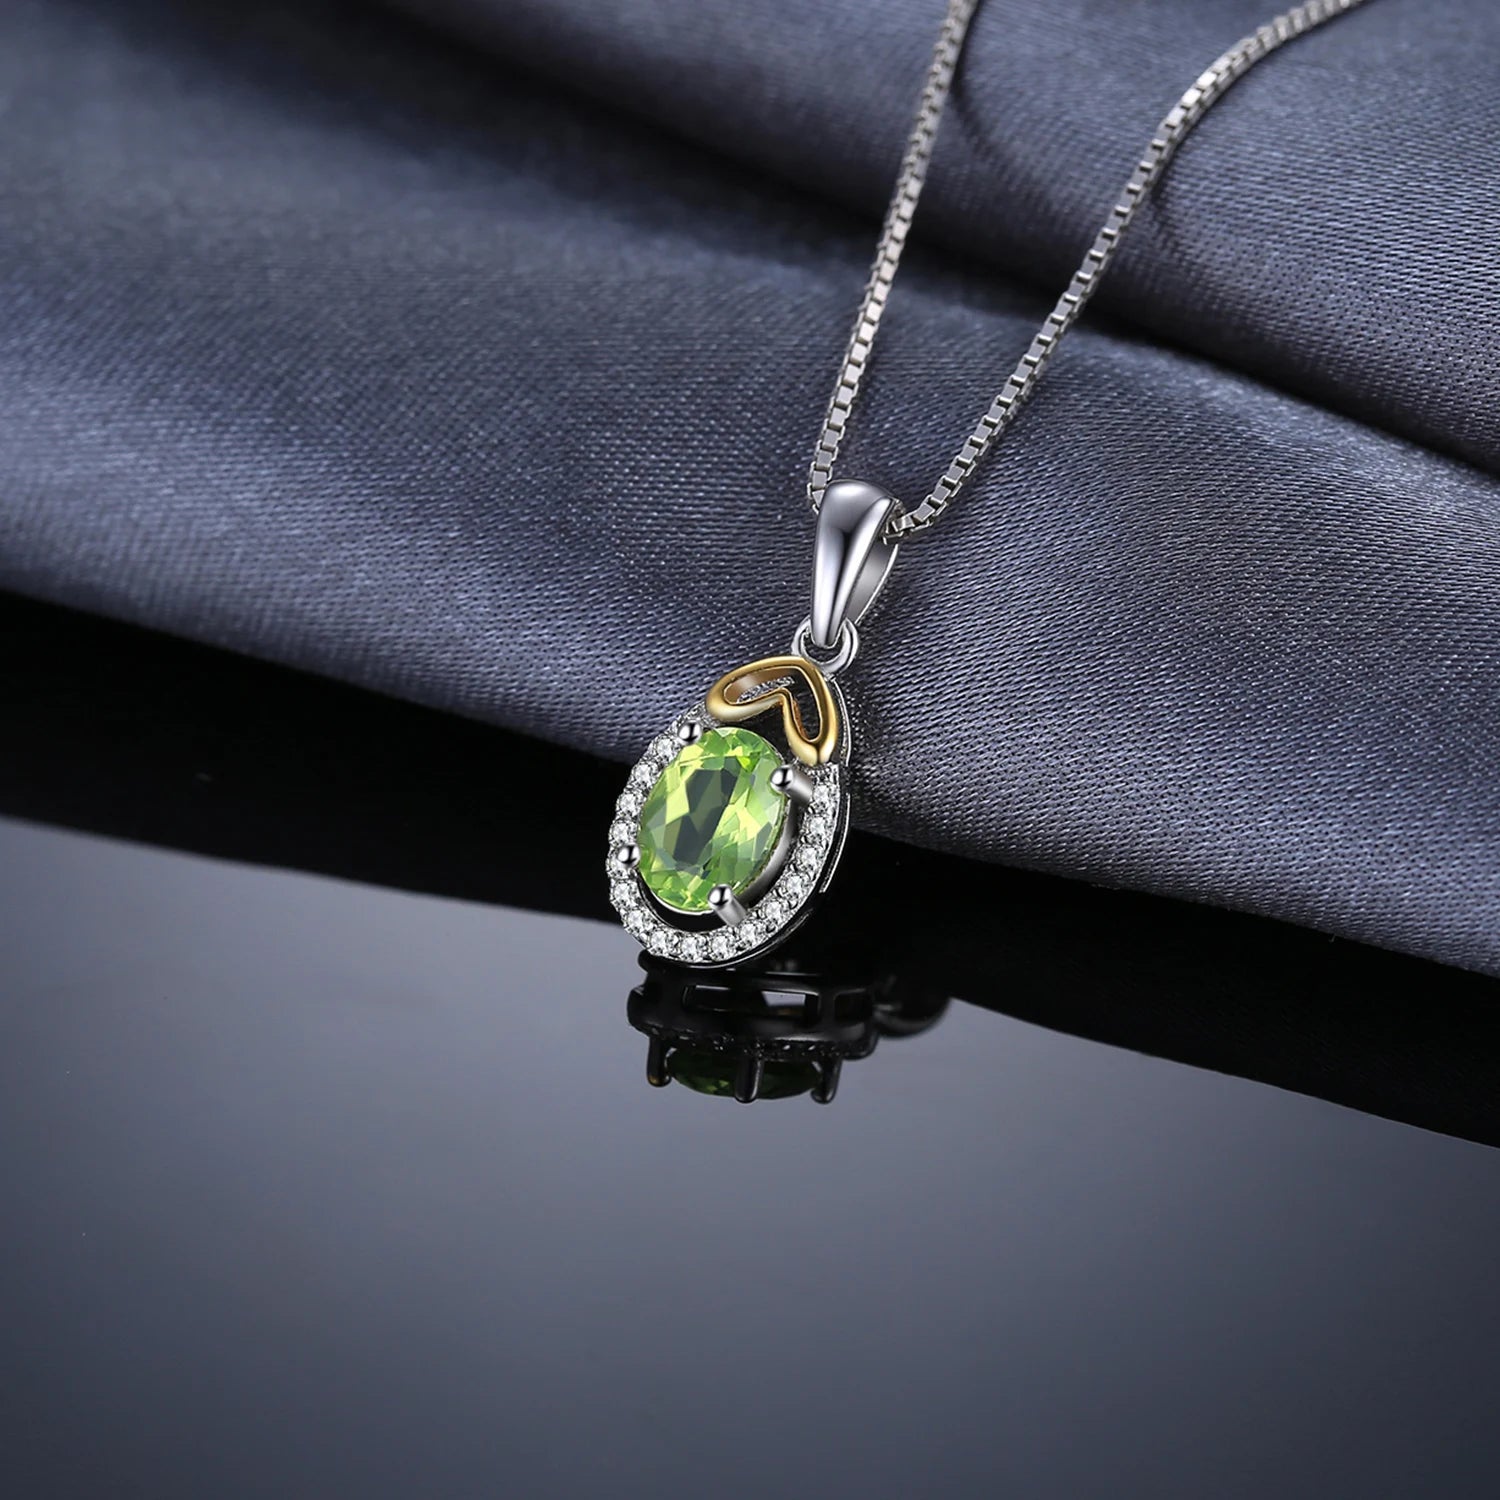 JewelryPalace Oval Cut Genuine Natural Green Peridot 925 Sterling Silver Pendant Necklace Gemstone Necklace for Women No Chain